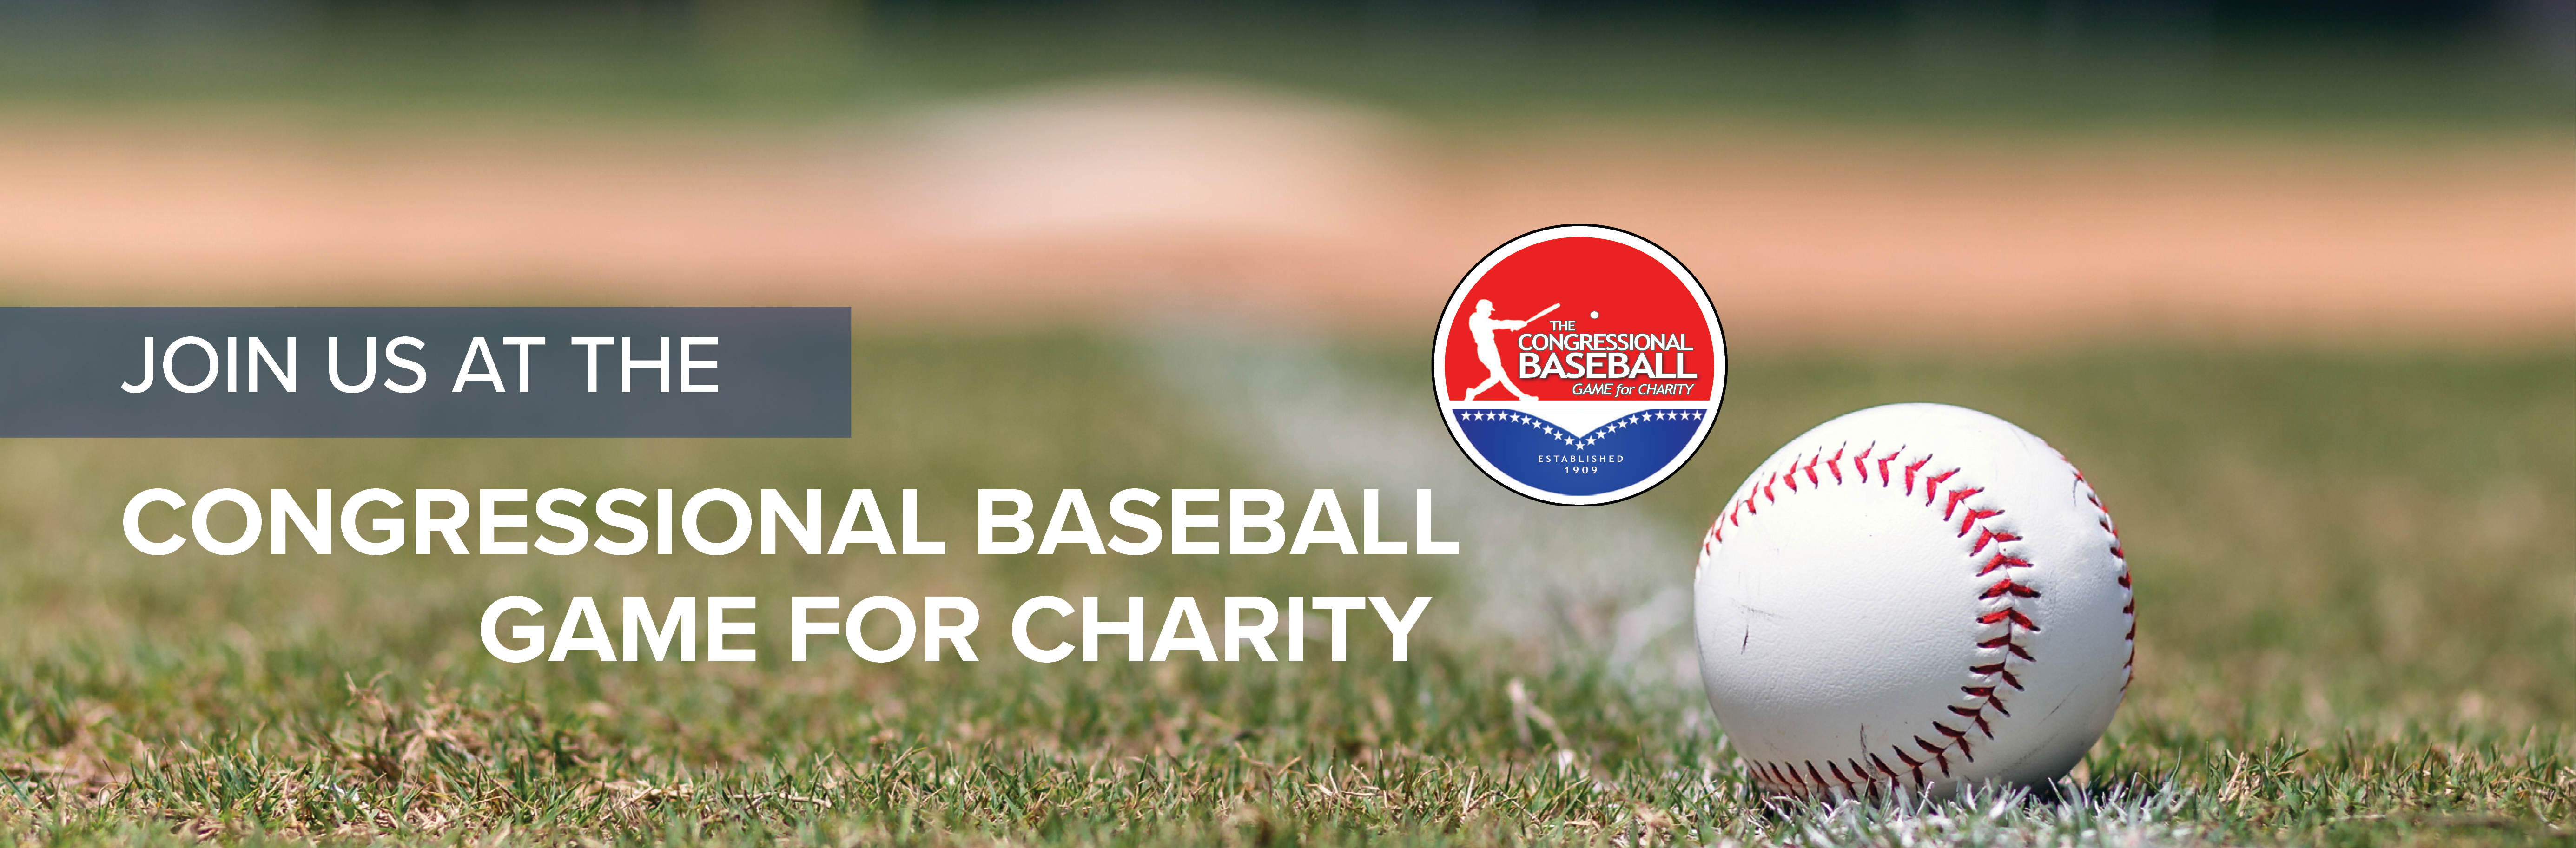 Join us at the Congressional Baseball Game for Charity June 26, 2019, 7:05 PM at Nationals Park